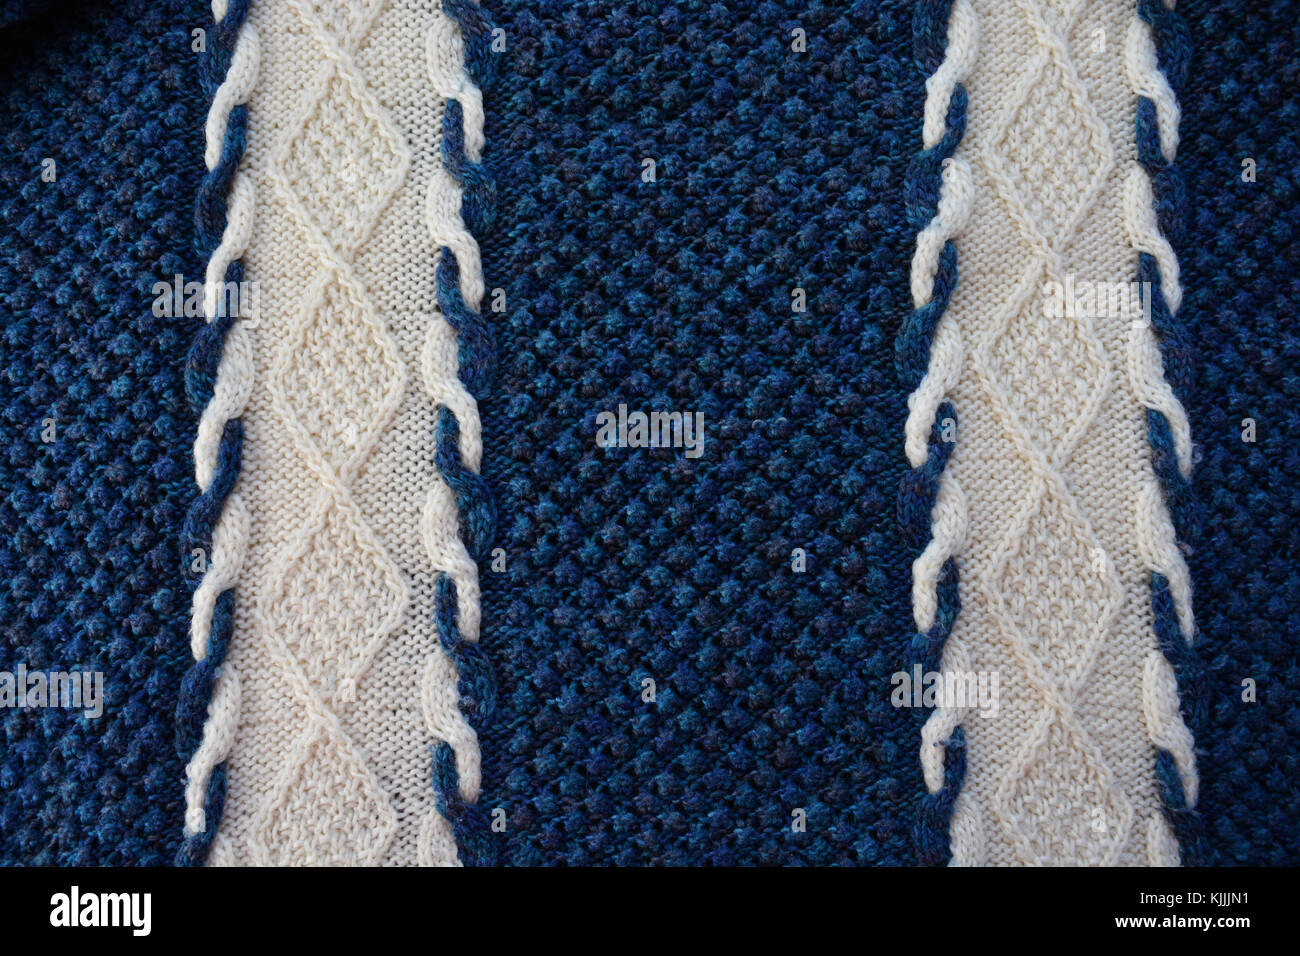 Detail of a woollen, hand knitted sweater Stock Photo